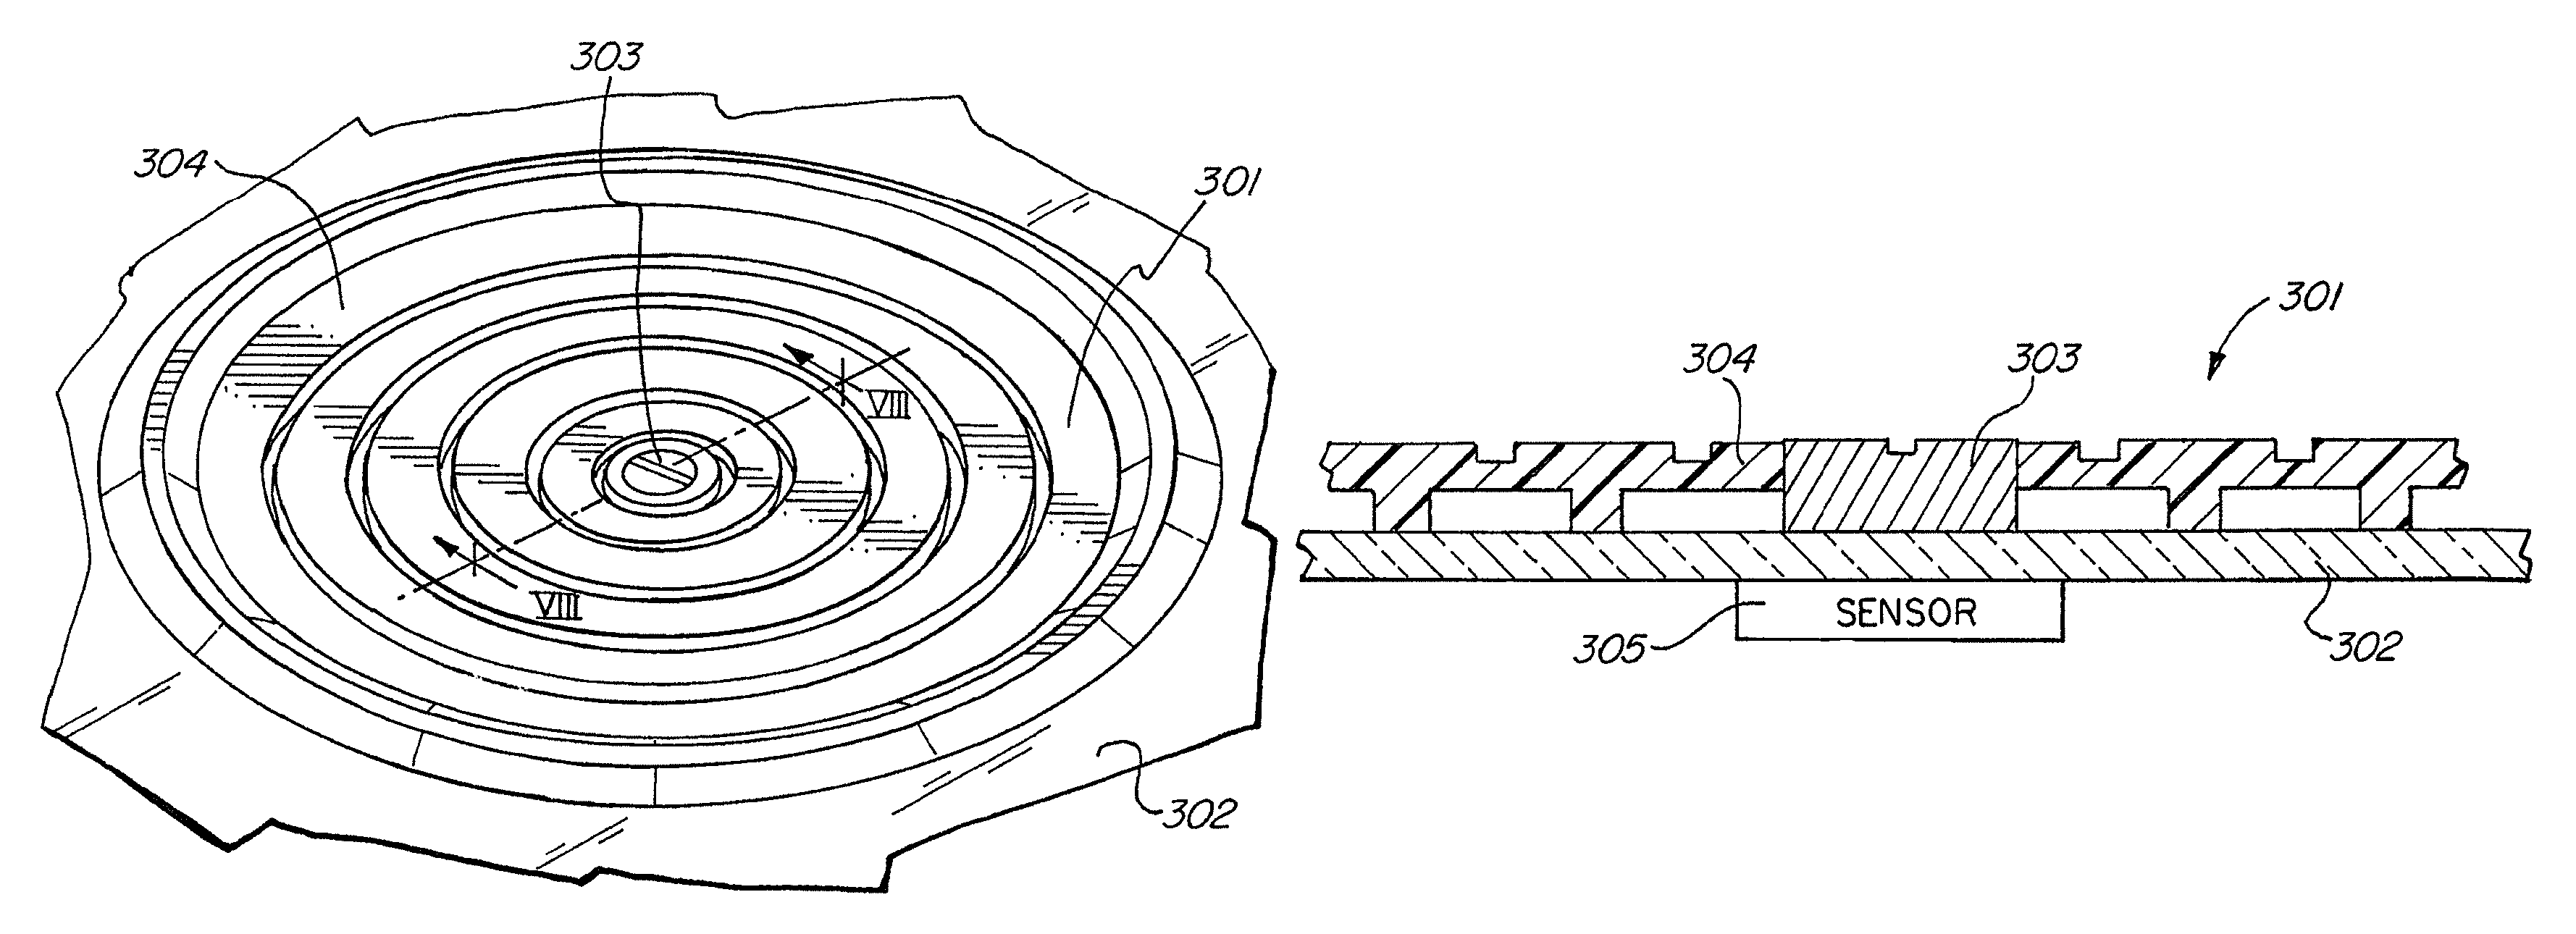 Induction cook-top apparatus